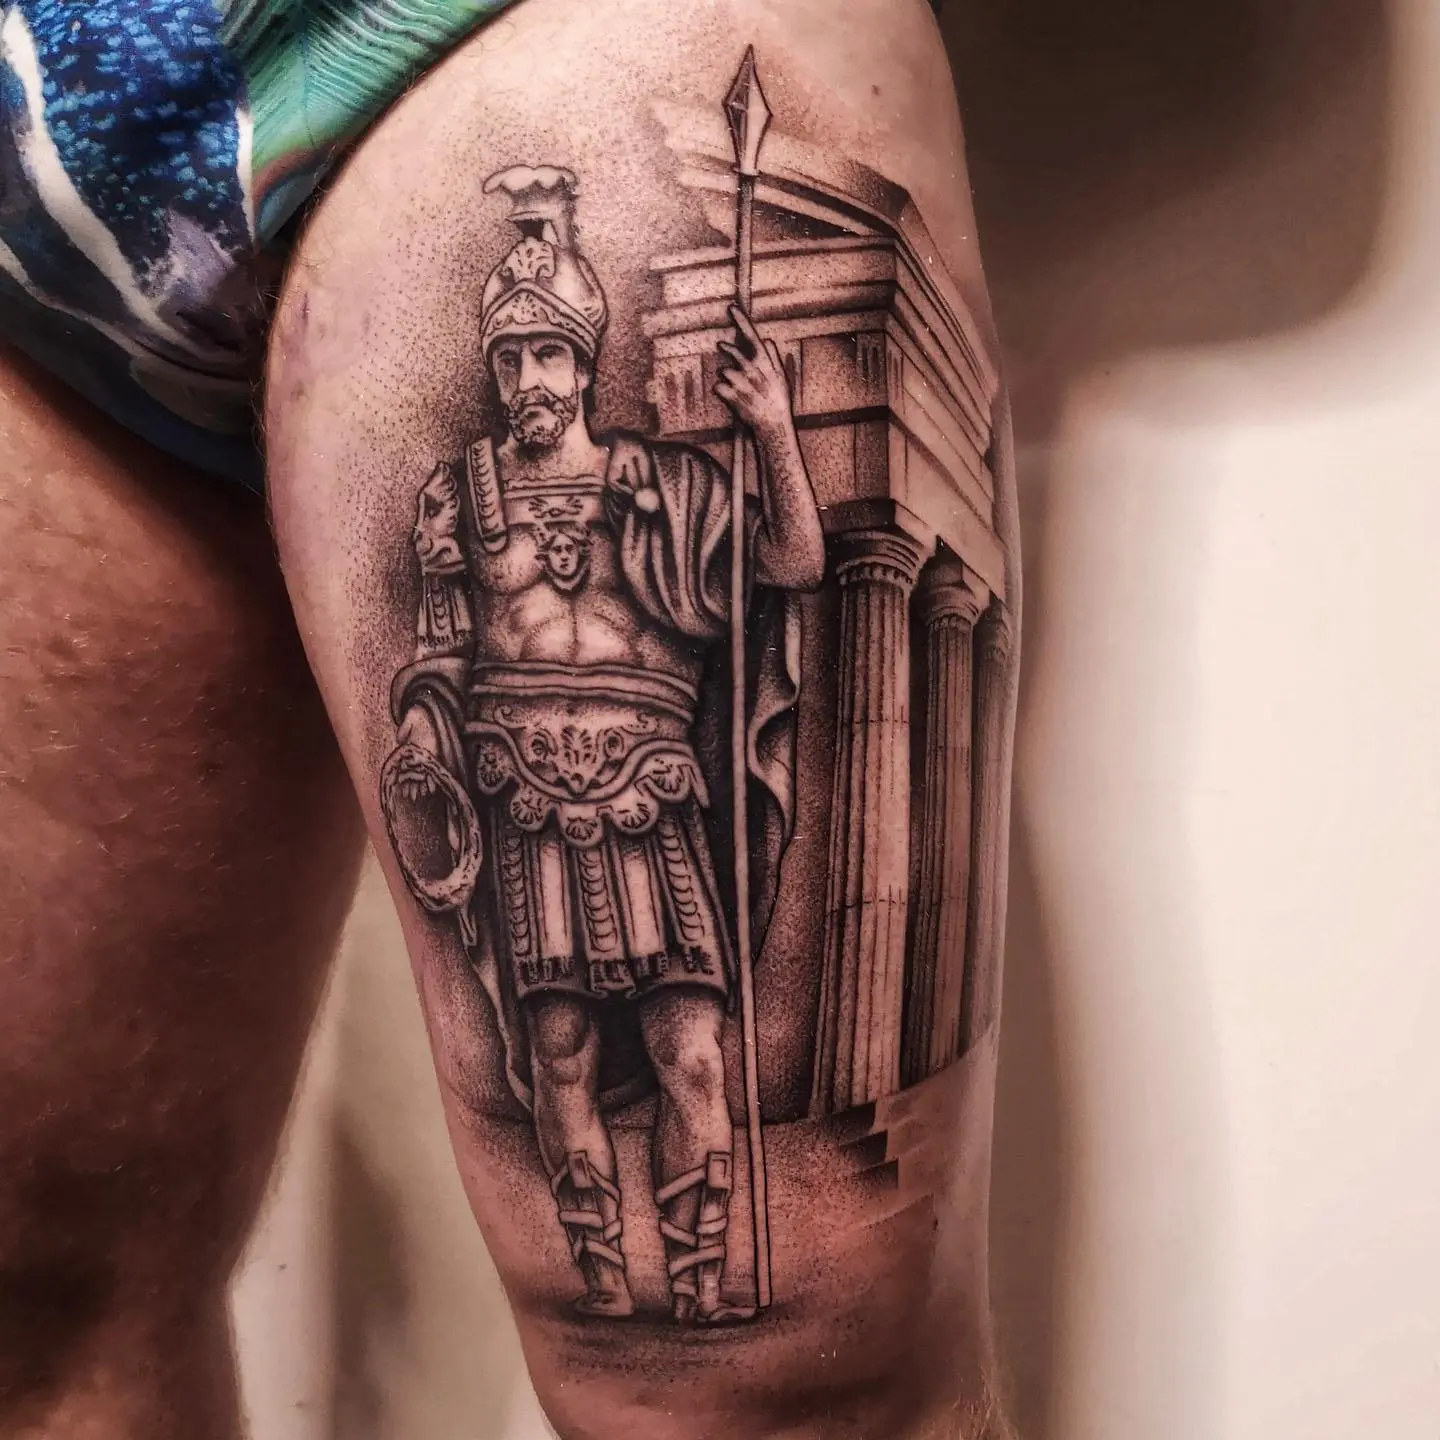 Mars (healed) with some roman temple ruins in the back (fresh) 
Done with the blackest out there @allegoryink  Thank you Mark for the interesting chat and for sitting like a damn stone!:)

studioxiii romanempire romans mars marstattoo statue sculpture healedtattoo healedtattoos realismtattoo bishoprotary tttism ttt blackandgreytattoos blackandgreyrealism stippletattoo stipple tattooartists tattooartistmag dotworktattoo dotworkers dotworktattoos thightattoo edinburghtattoostudio scotlandtattoo besttattoos tattooedmen menwithtattoos